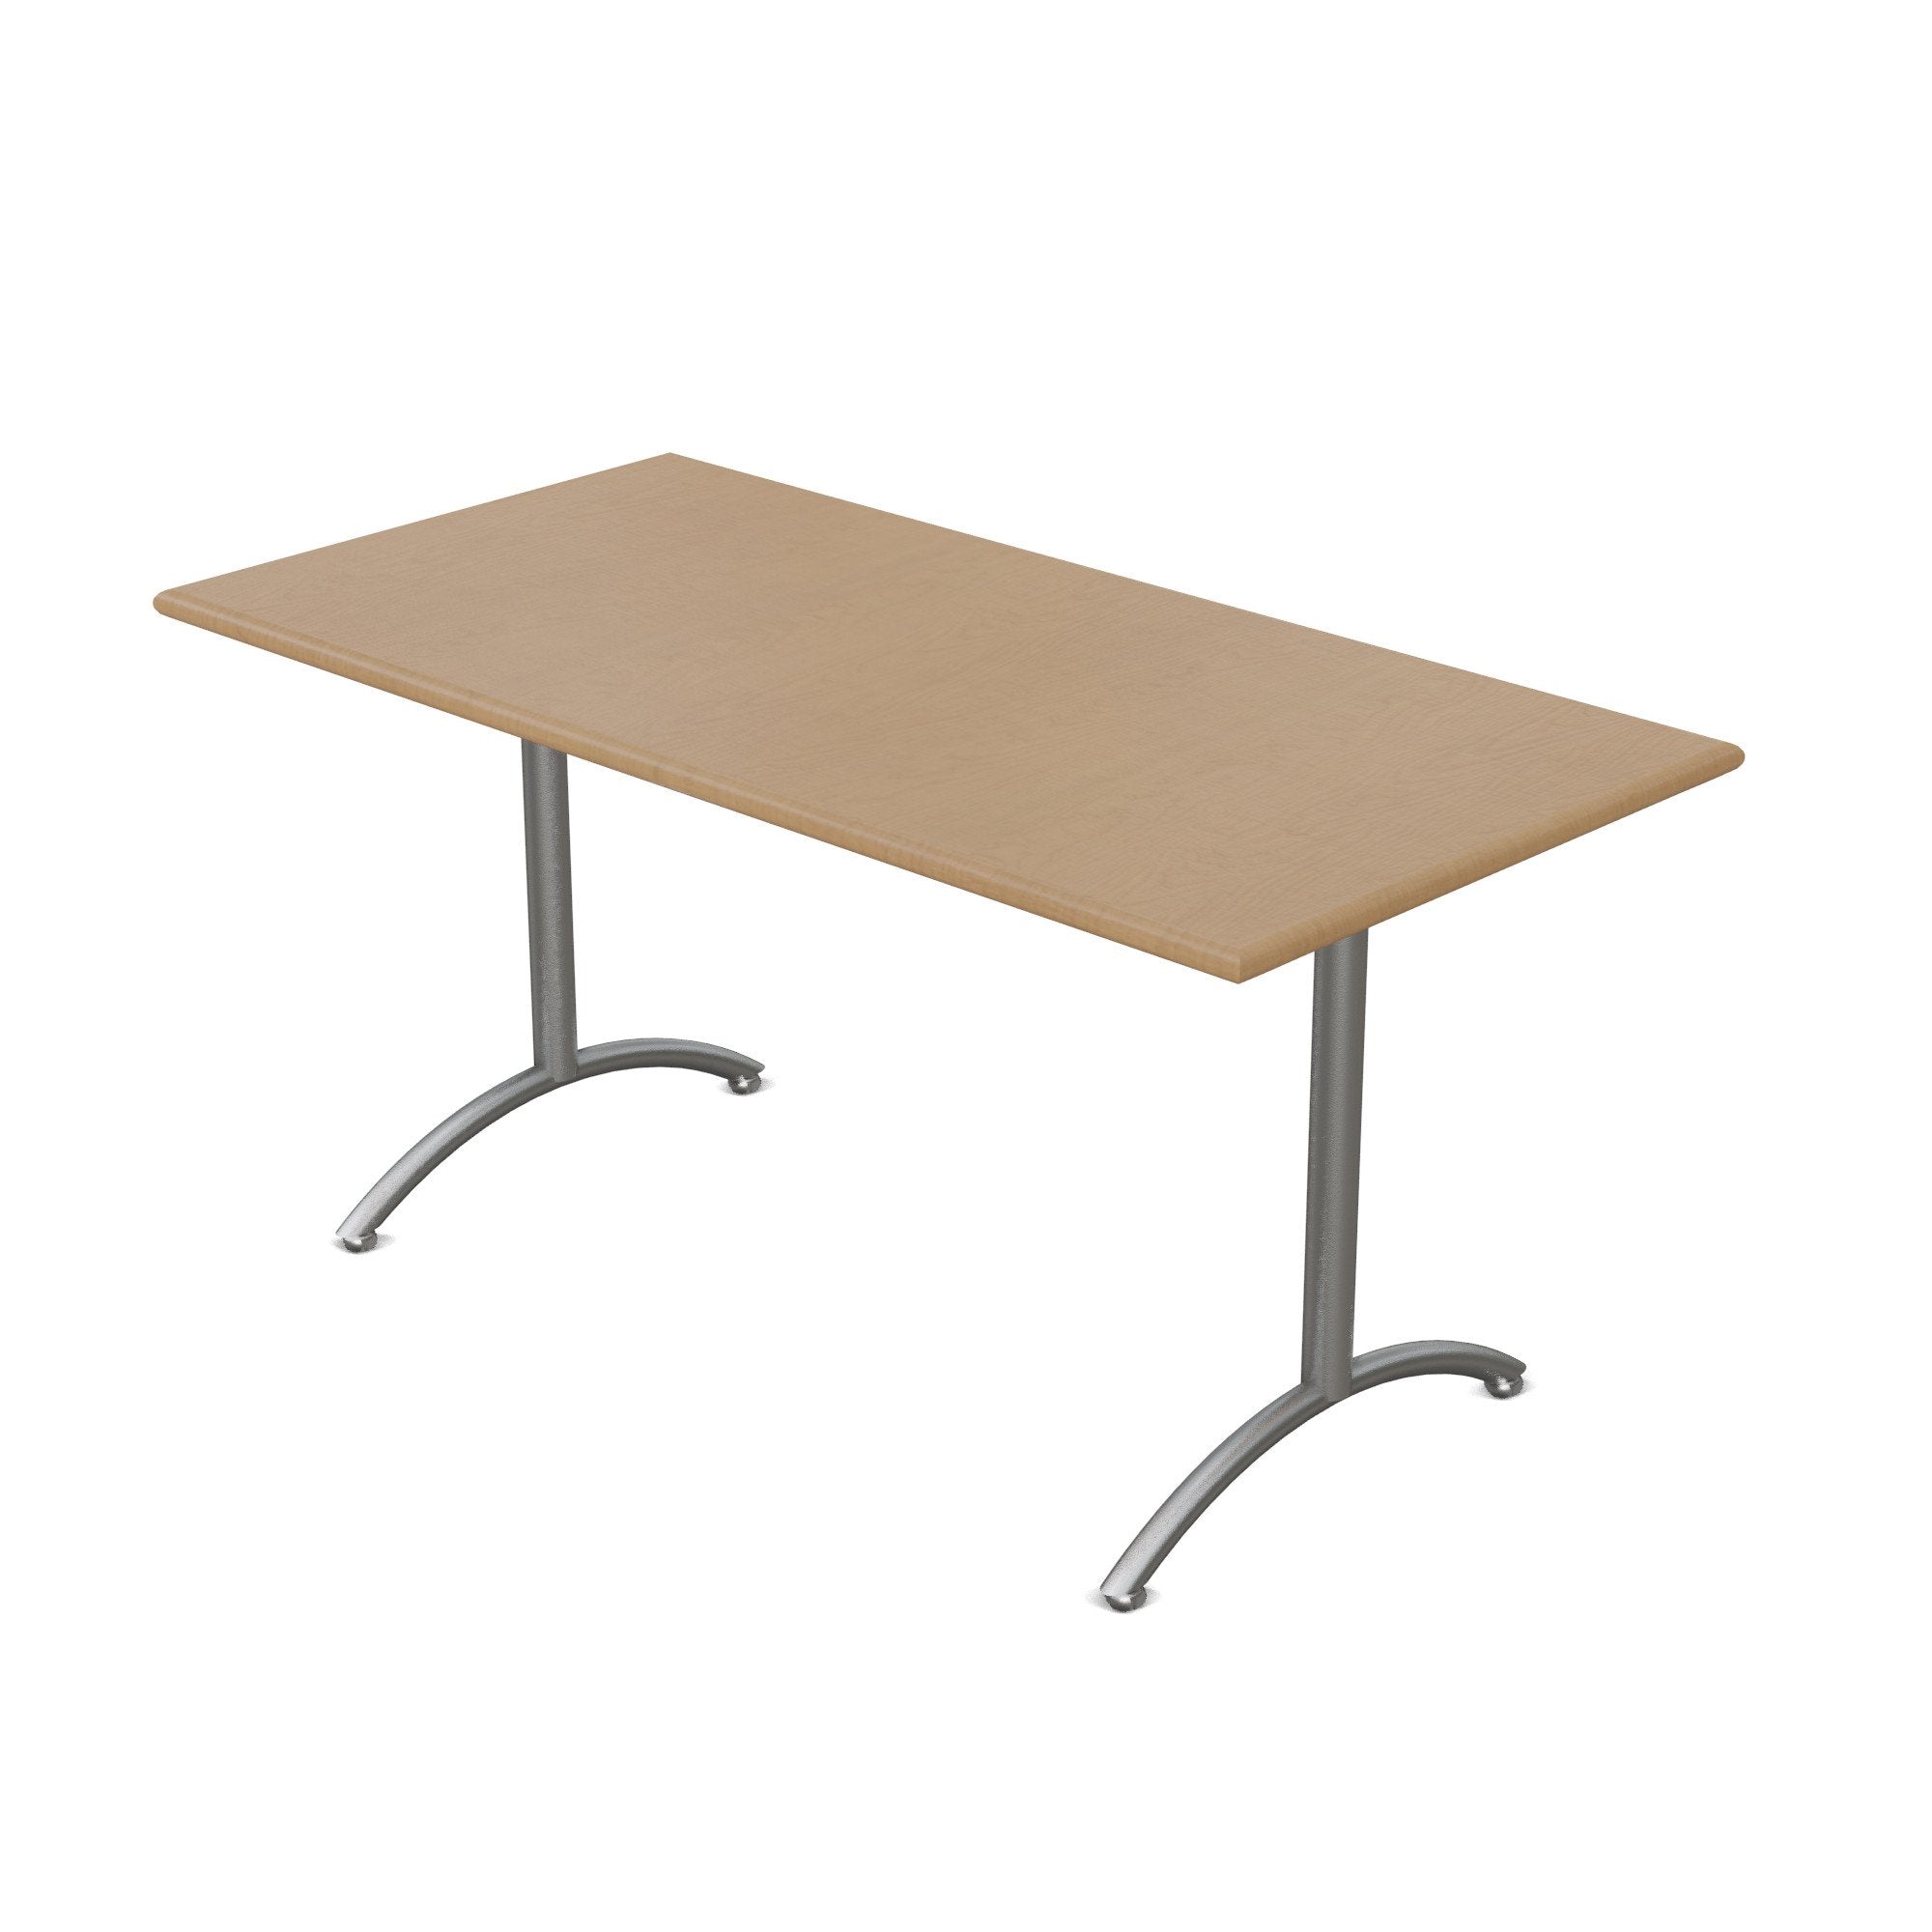 Tables-Aura Series: Laminate Work Surfaces with Solid Wood Edges